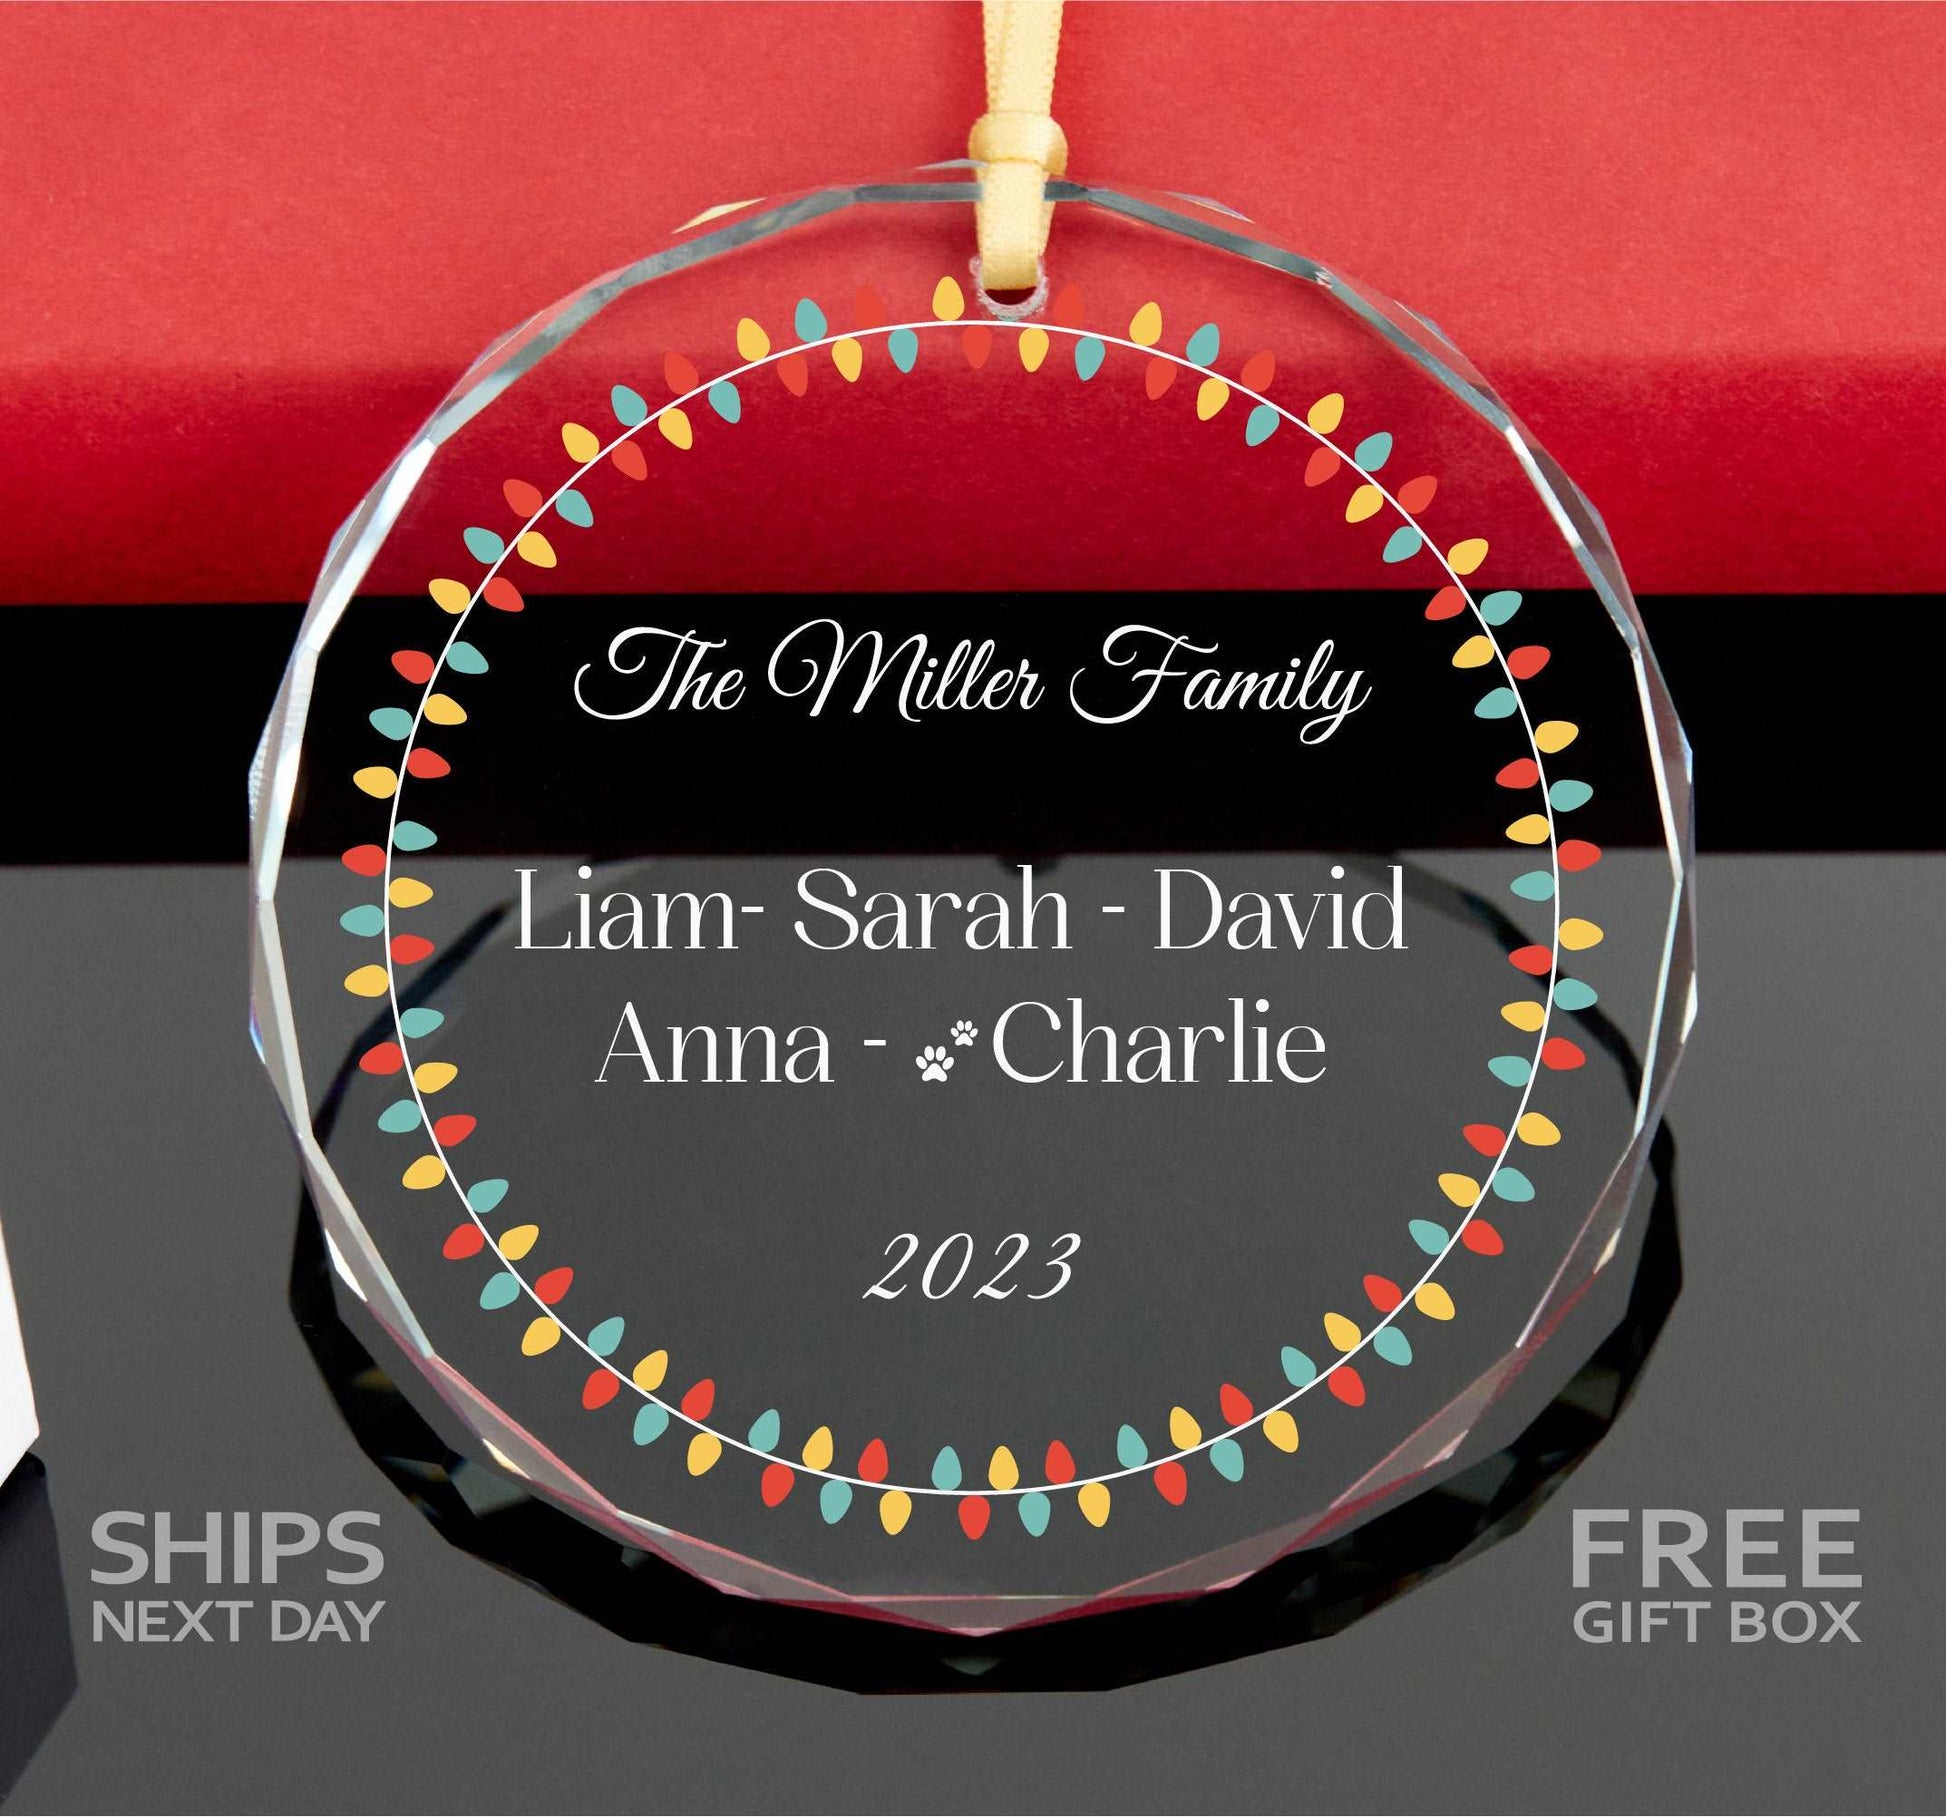 Personalized Family Christmas Ornament • Family Christmas Ornament with Pet Name • Gift for Family • Gift for Grandparents 